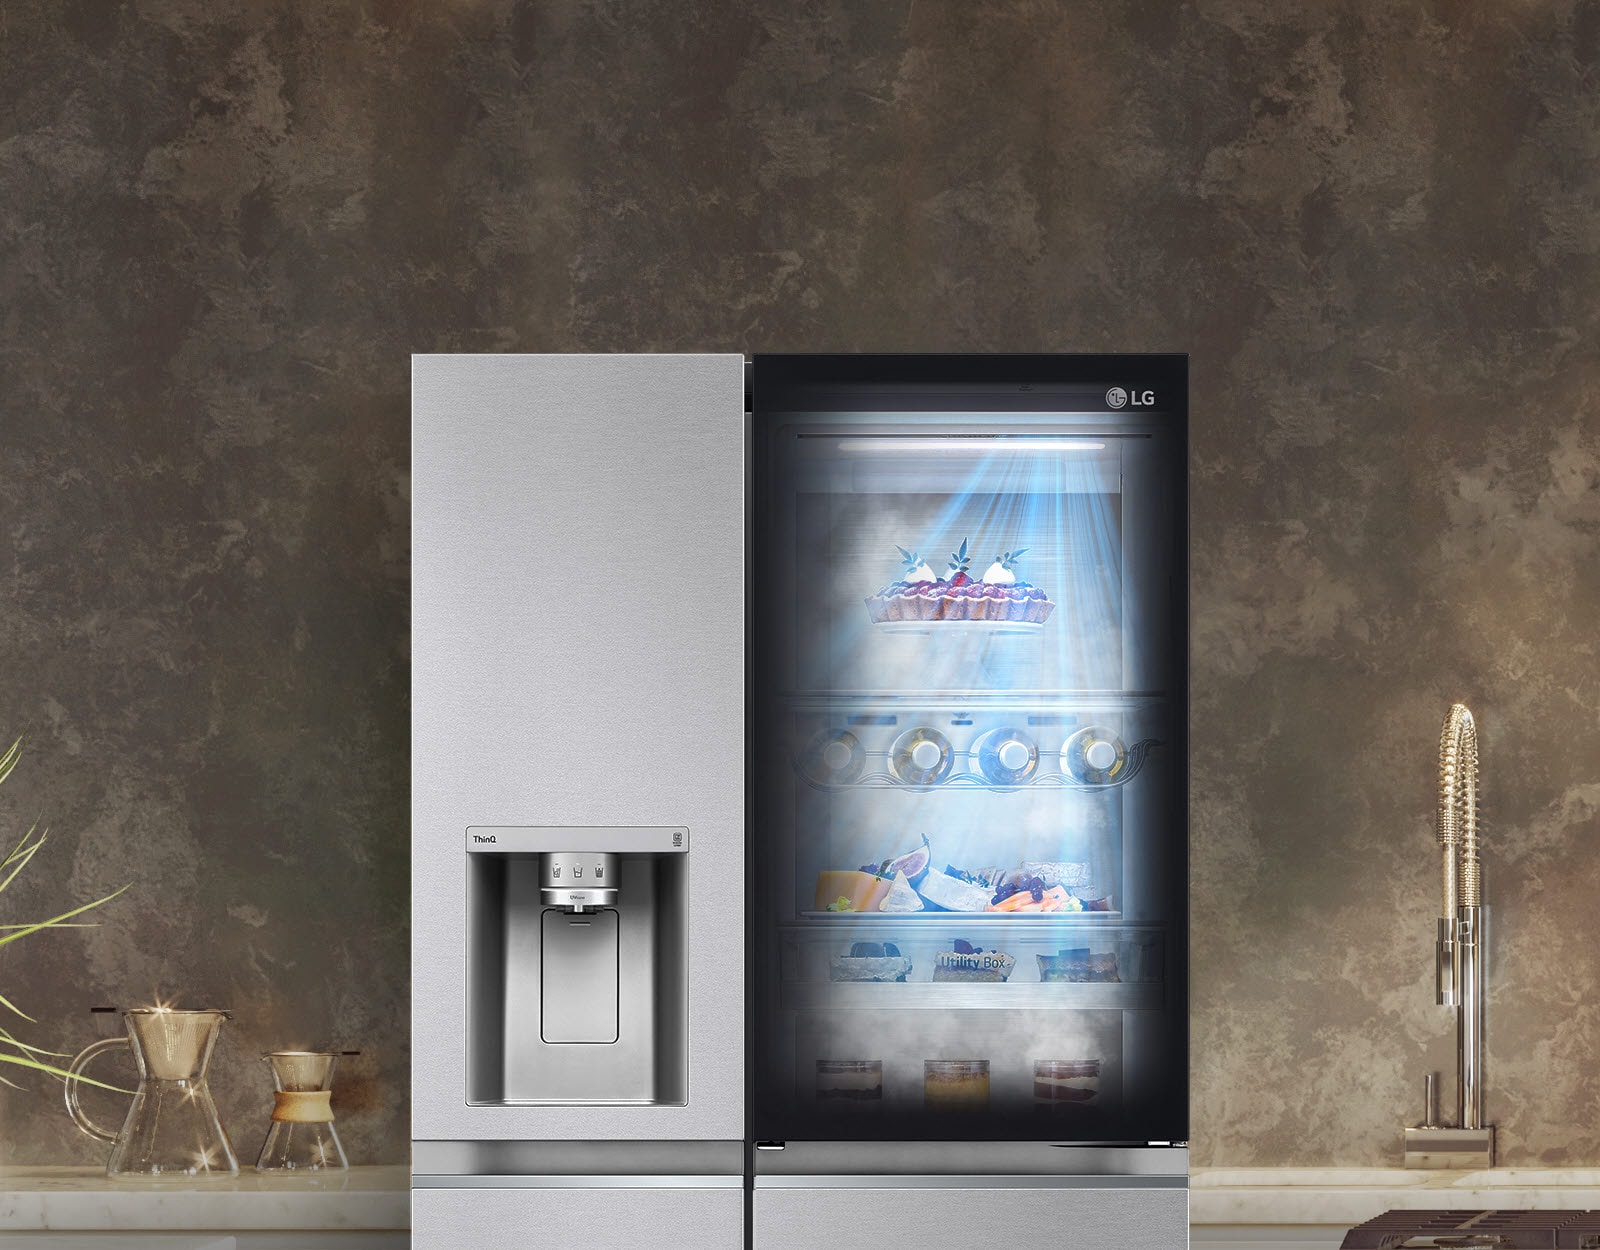 Refrigerador LG 27 Pies Instaview Side By Side Silver